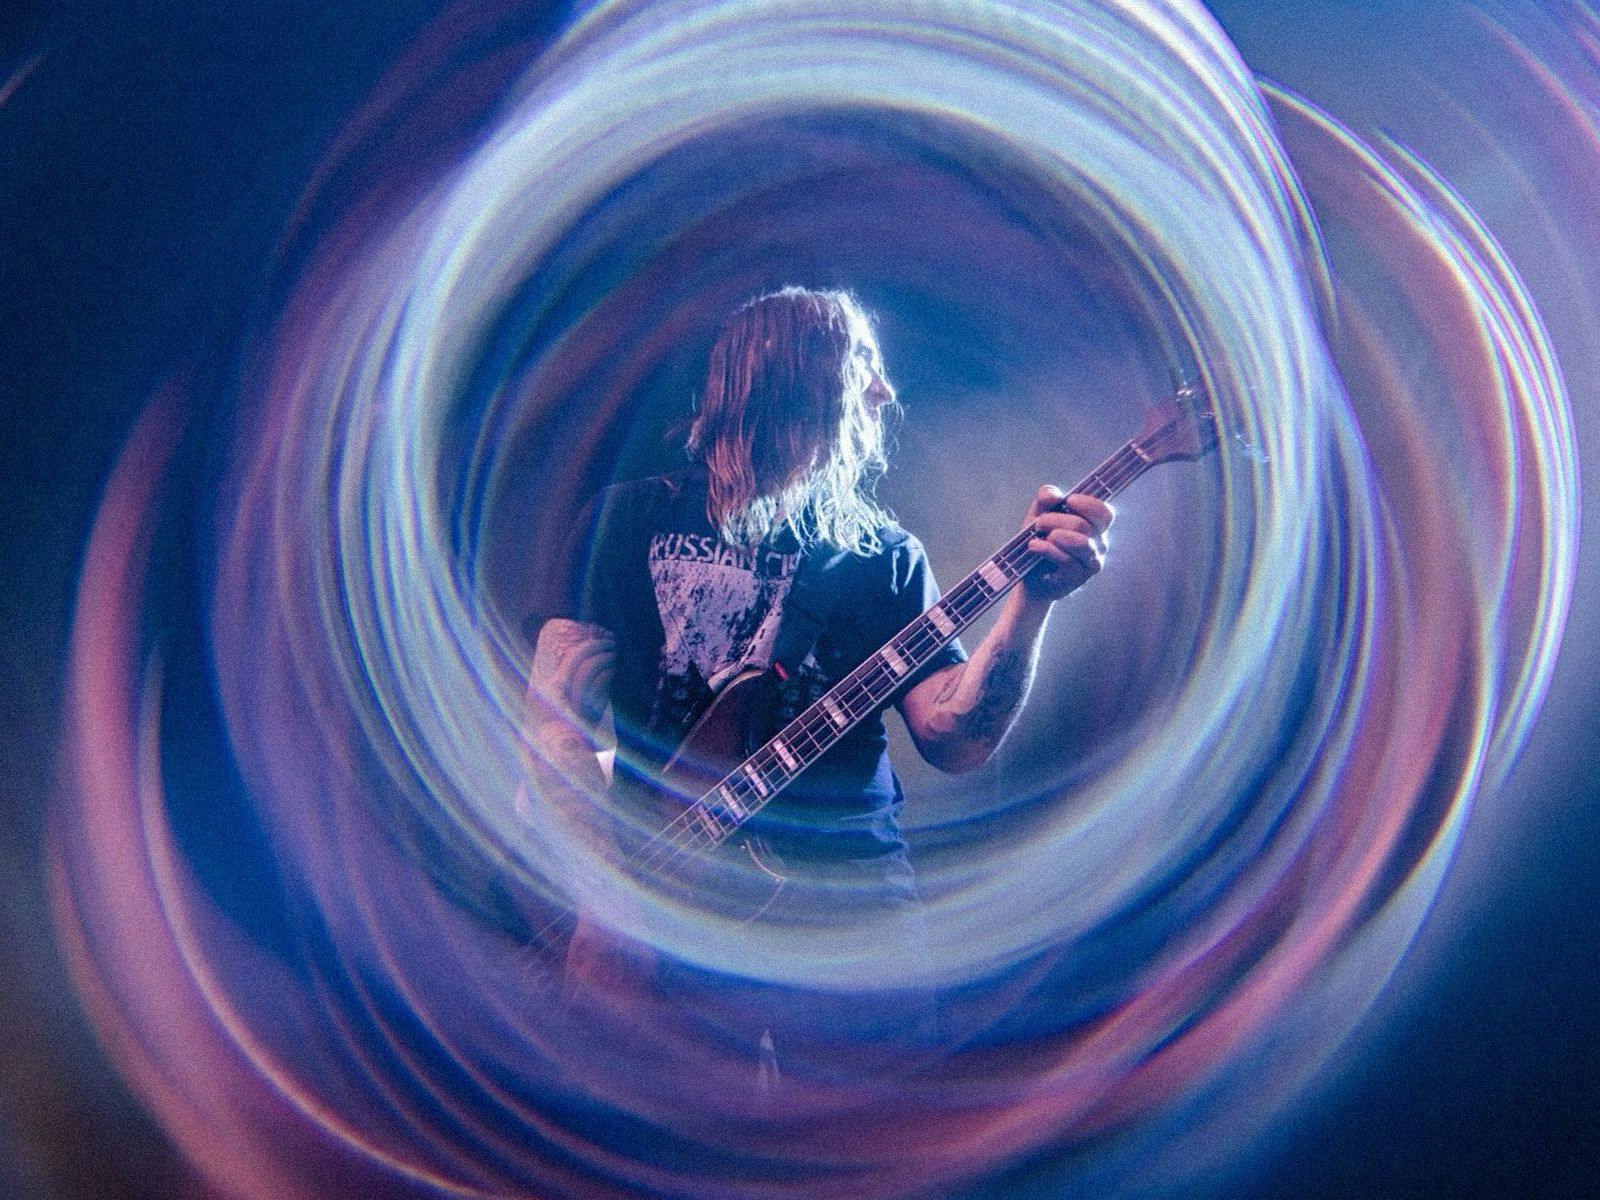 A guitarist on-stage, a long exposure photo gives the effect of circular lines of light around him.